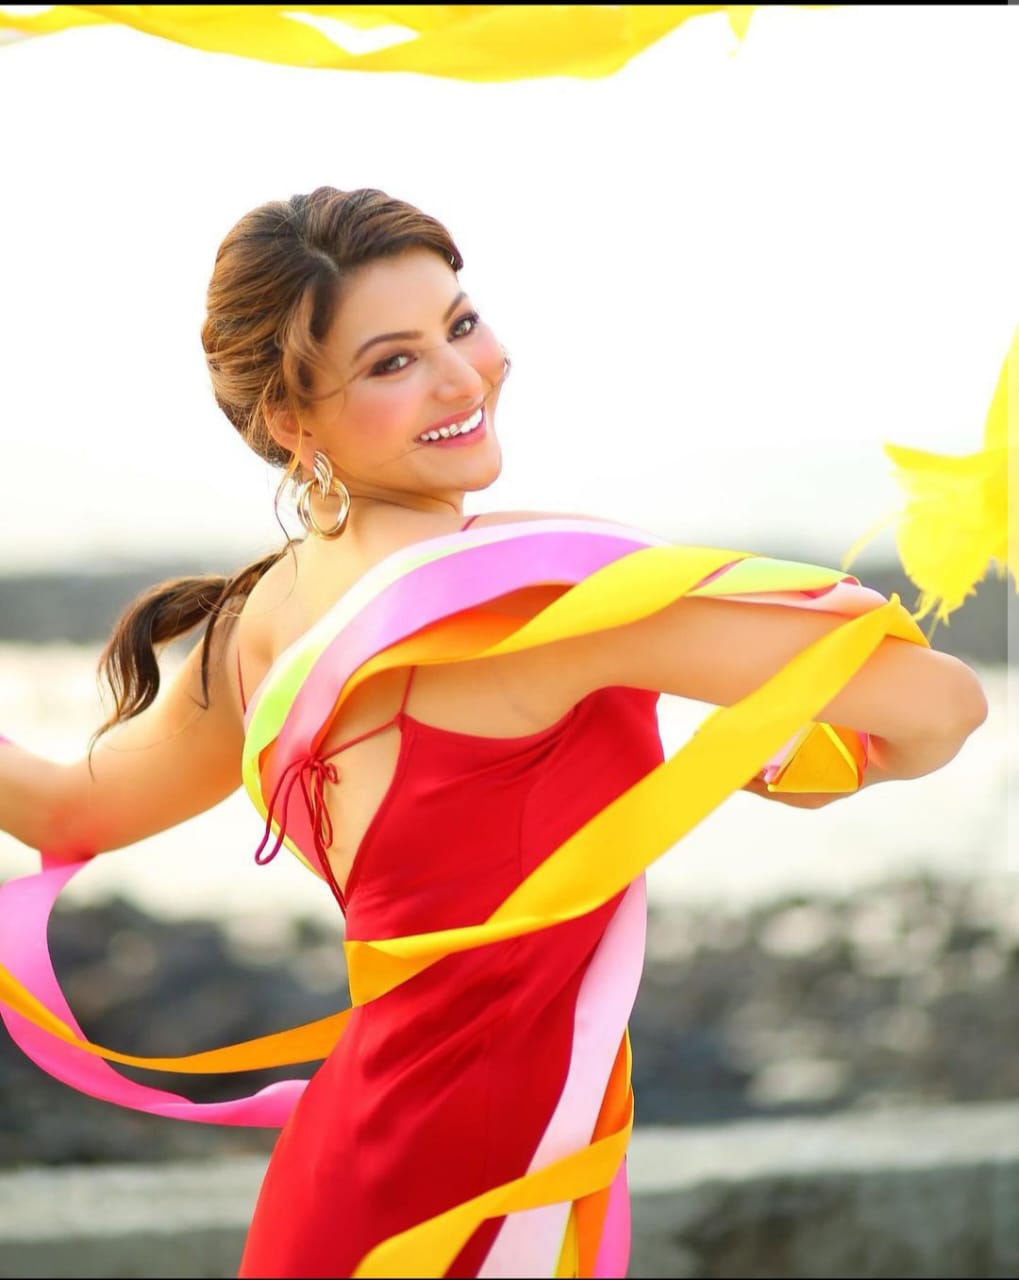 Urvashi Rautela's Hottest Red Spaghetti Dress Is Something To Die For